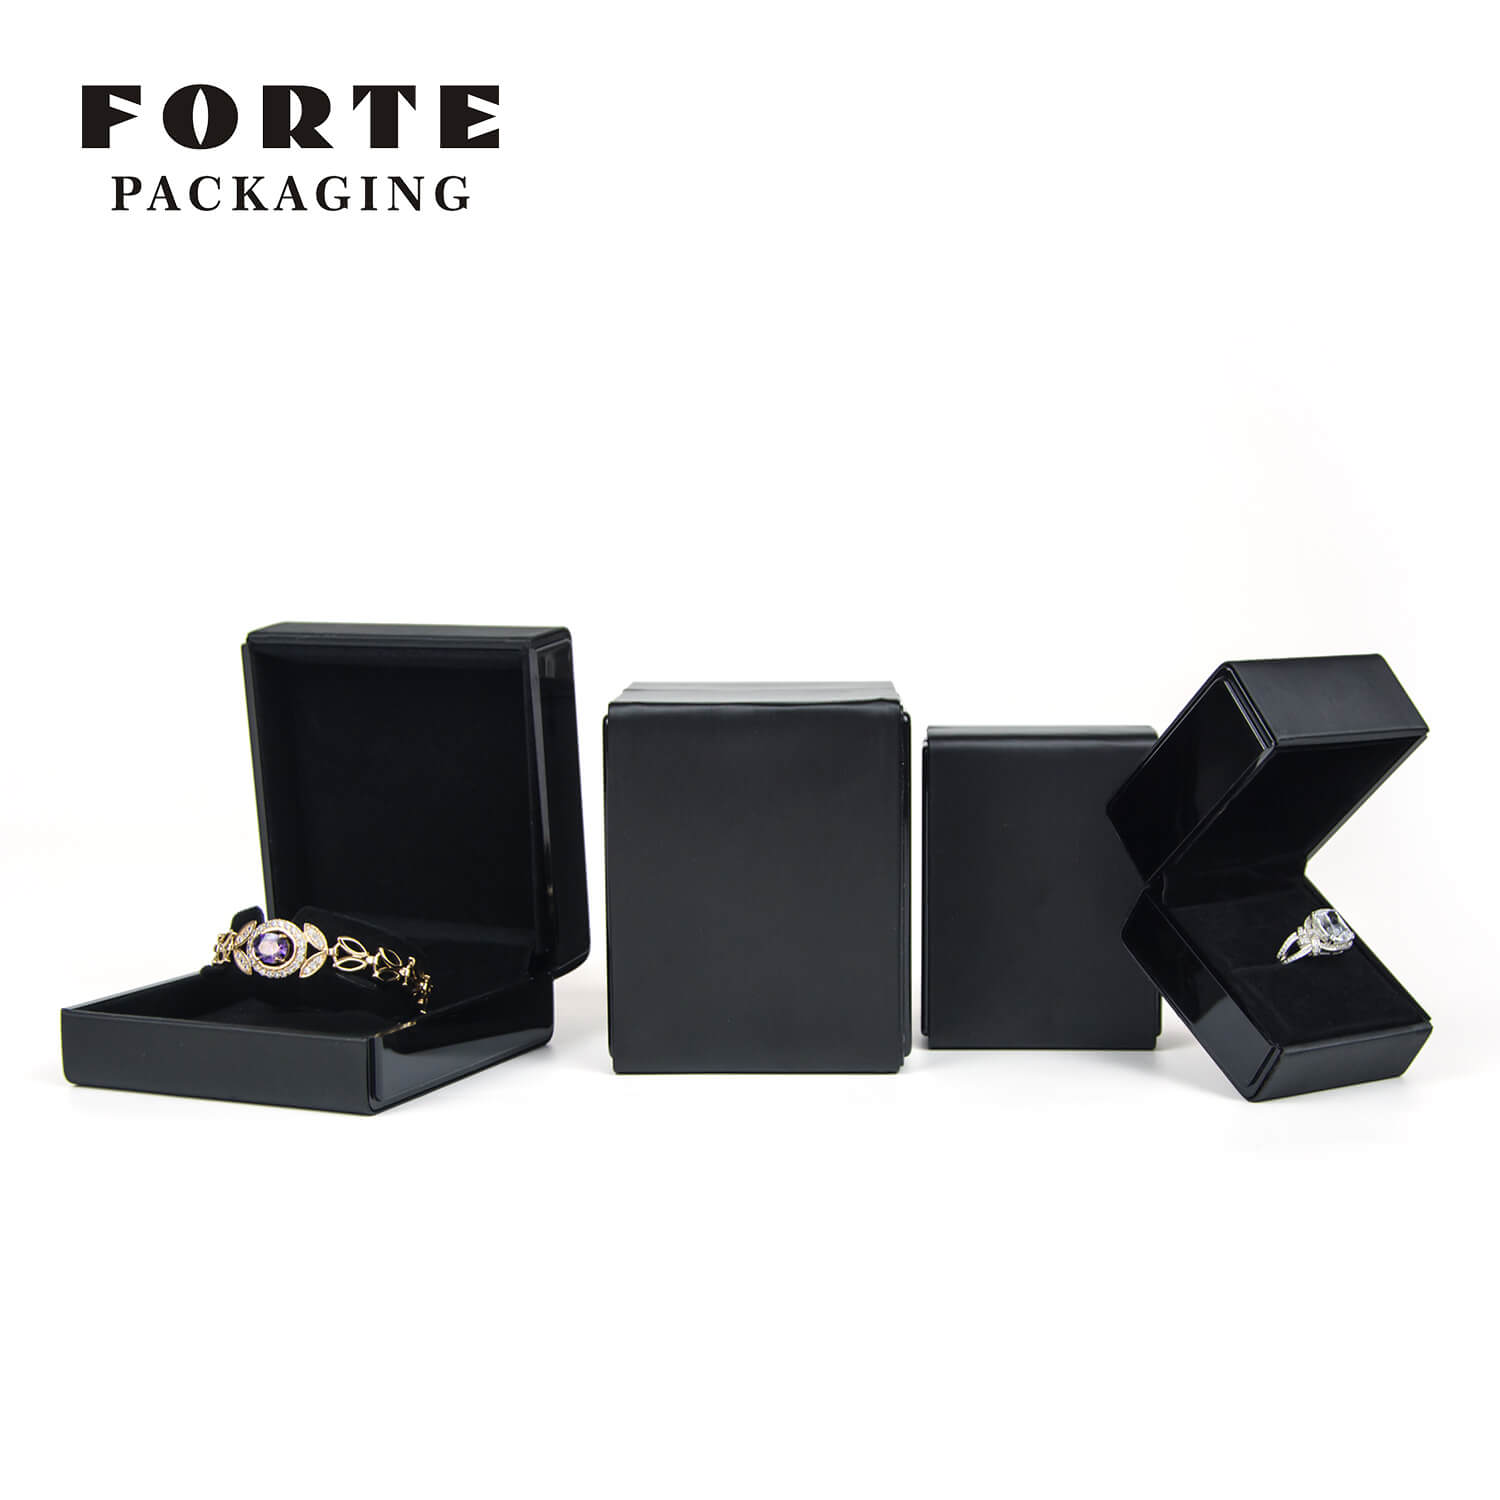 FORTE black piano lacquer printing storage case ring pendant watch Jewelry Packaging without LED light 